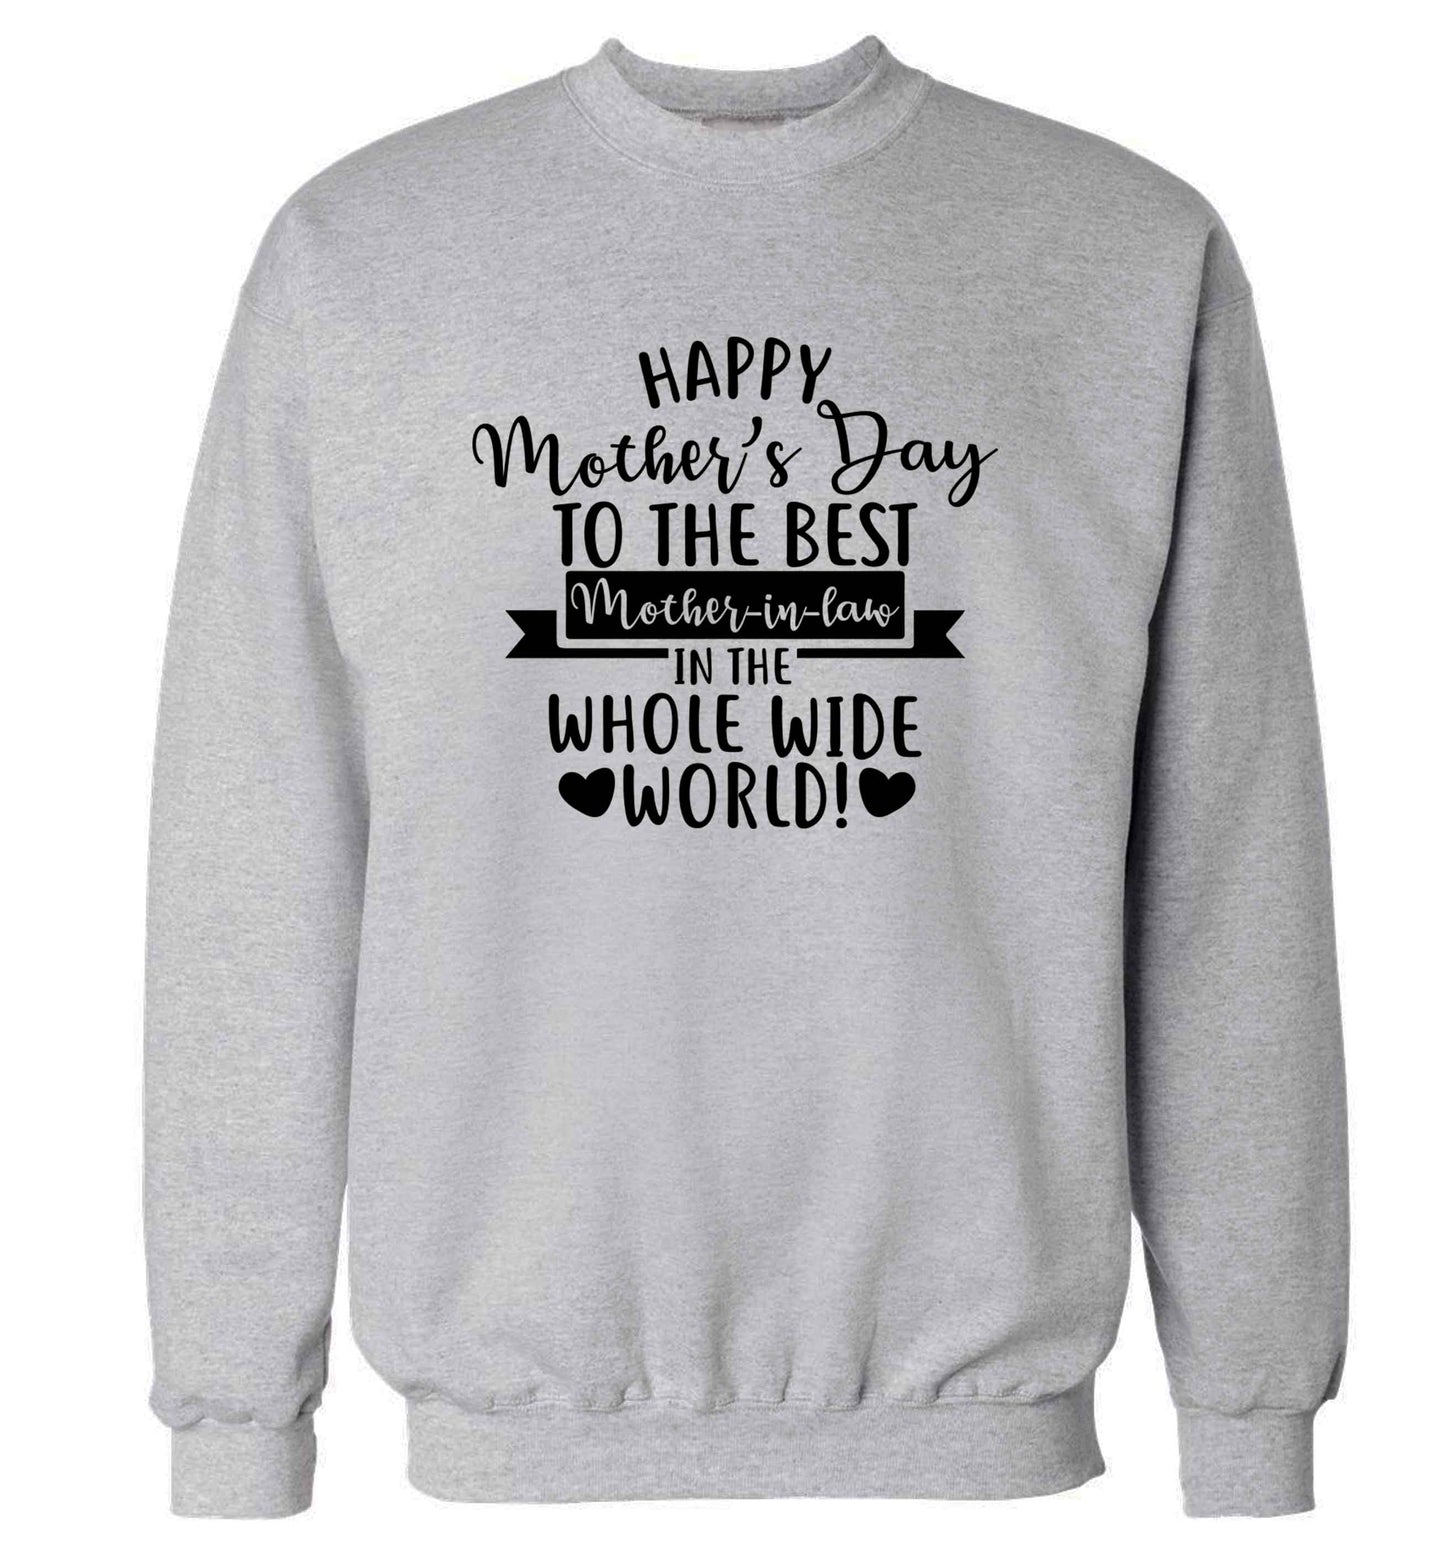 Happy mother's day to the best mother-in law in the world adult's unisex grey sweater 2XL